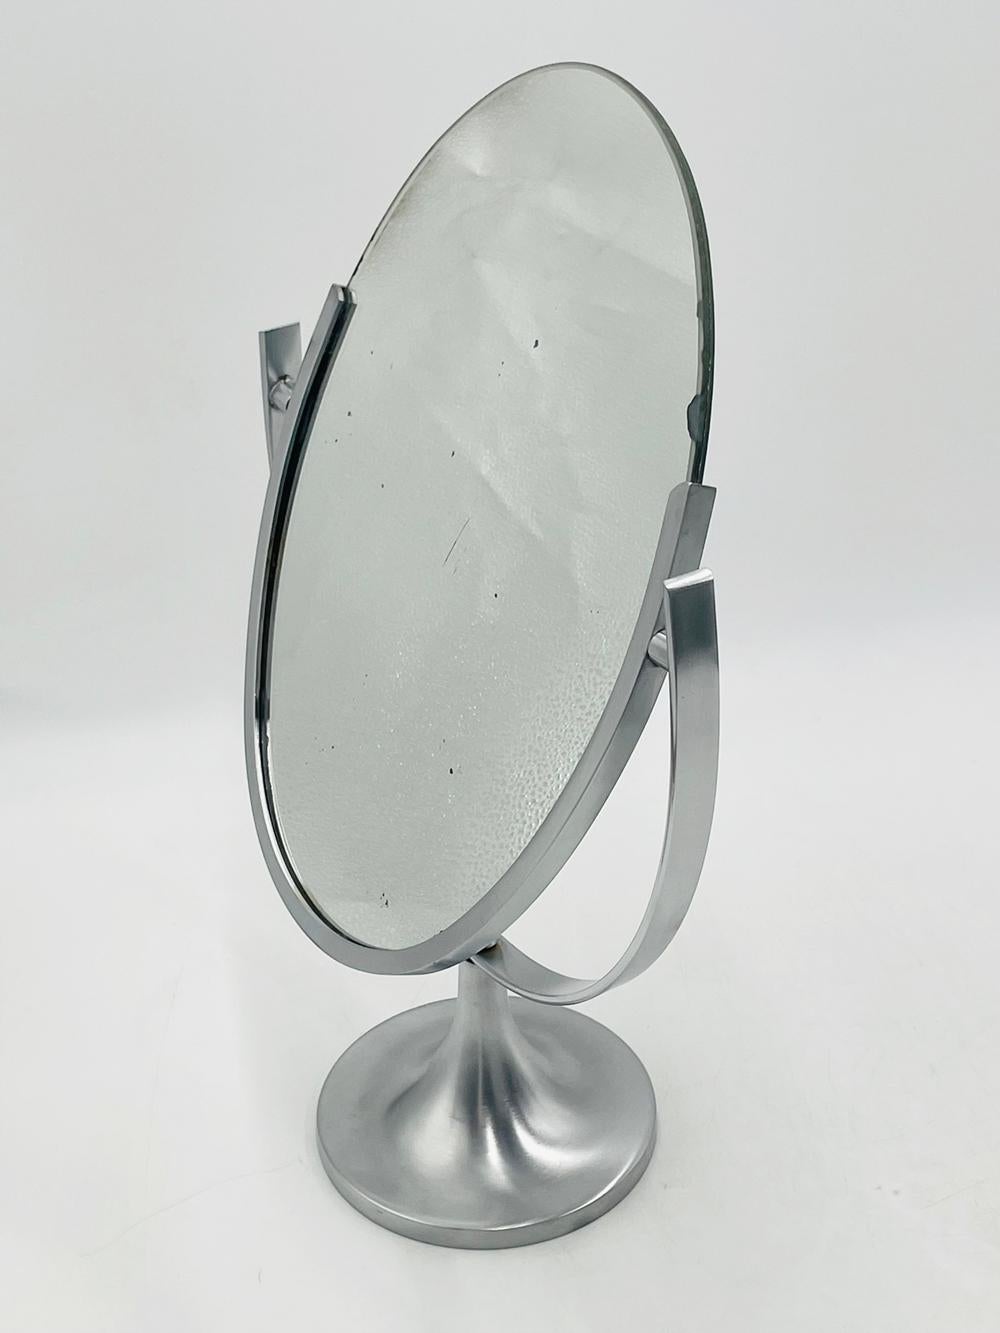 Introducing the Bugle Base Vanity Mirror by Charles Hollis Jones, a true vintage gem from the 1960s that exudes timeless elegance. This striking piece of furniture showcases exceptional craftsmanship and showcases the iconic design aesthetic of